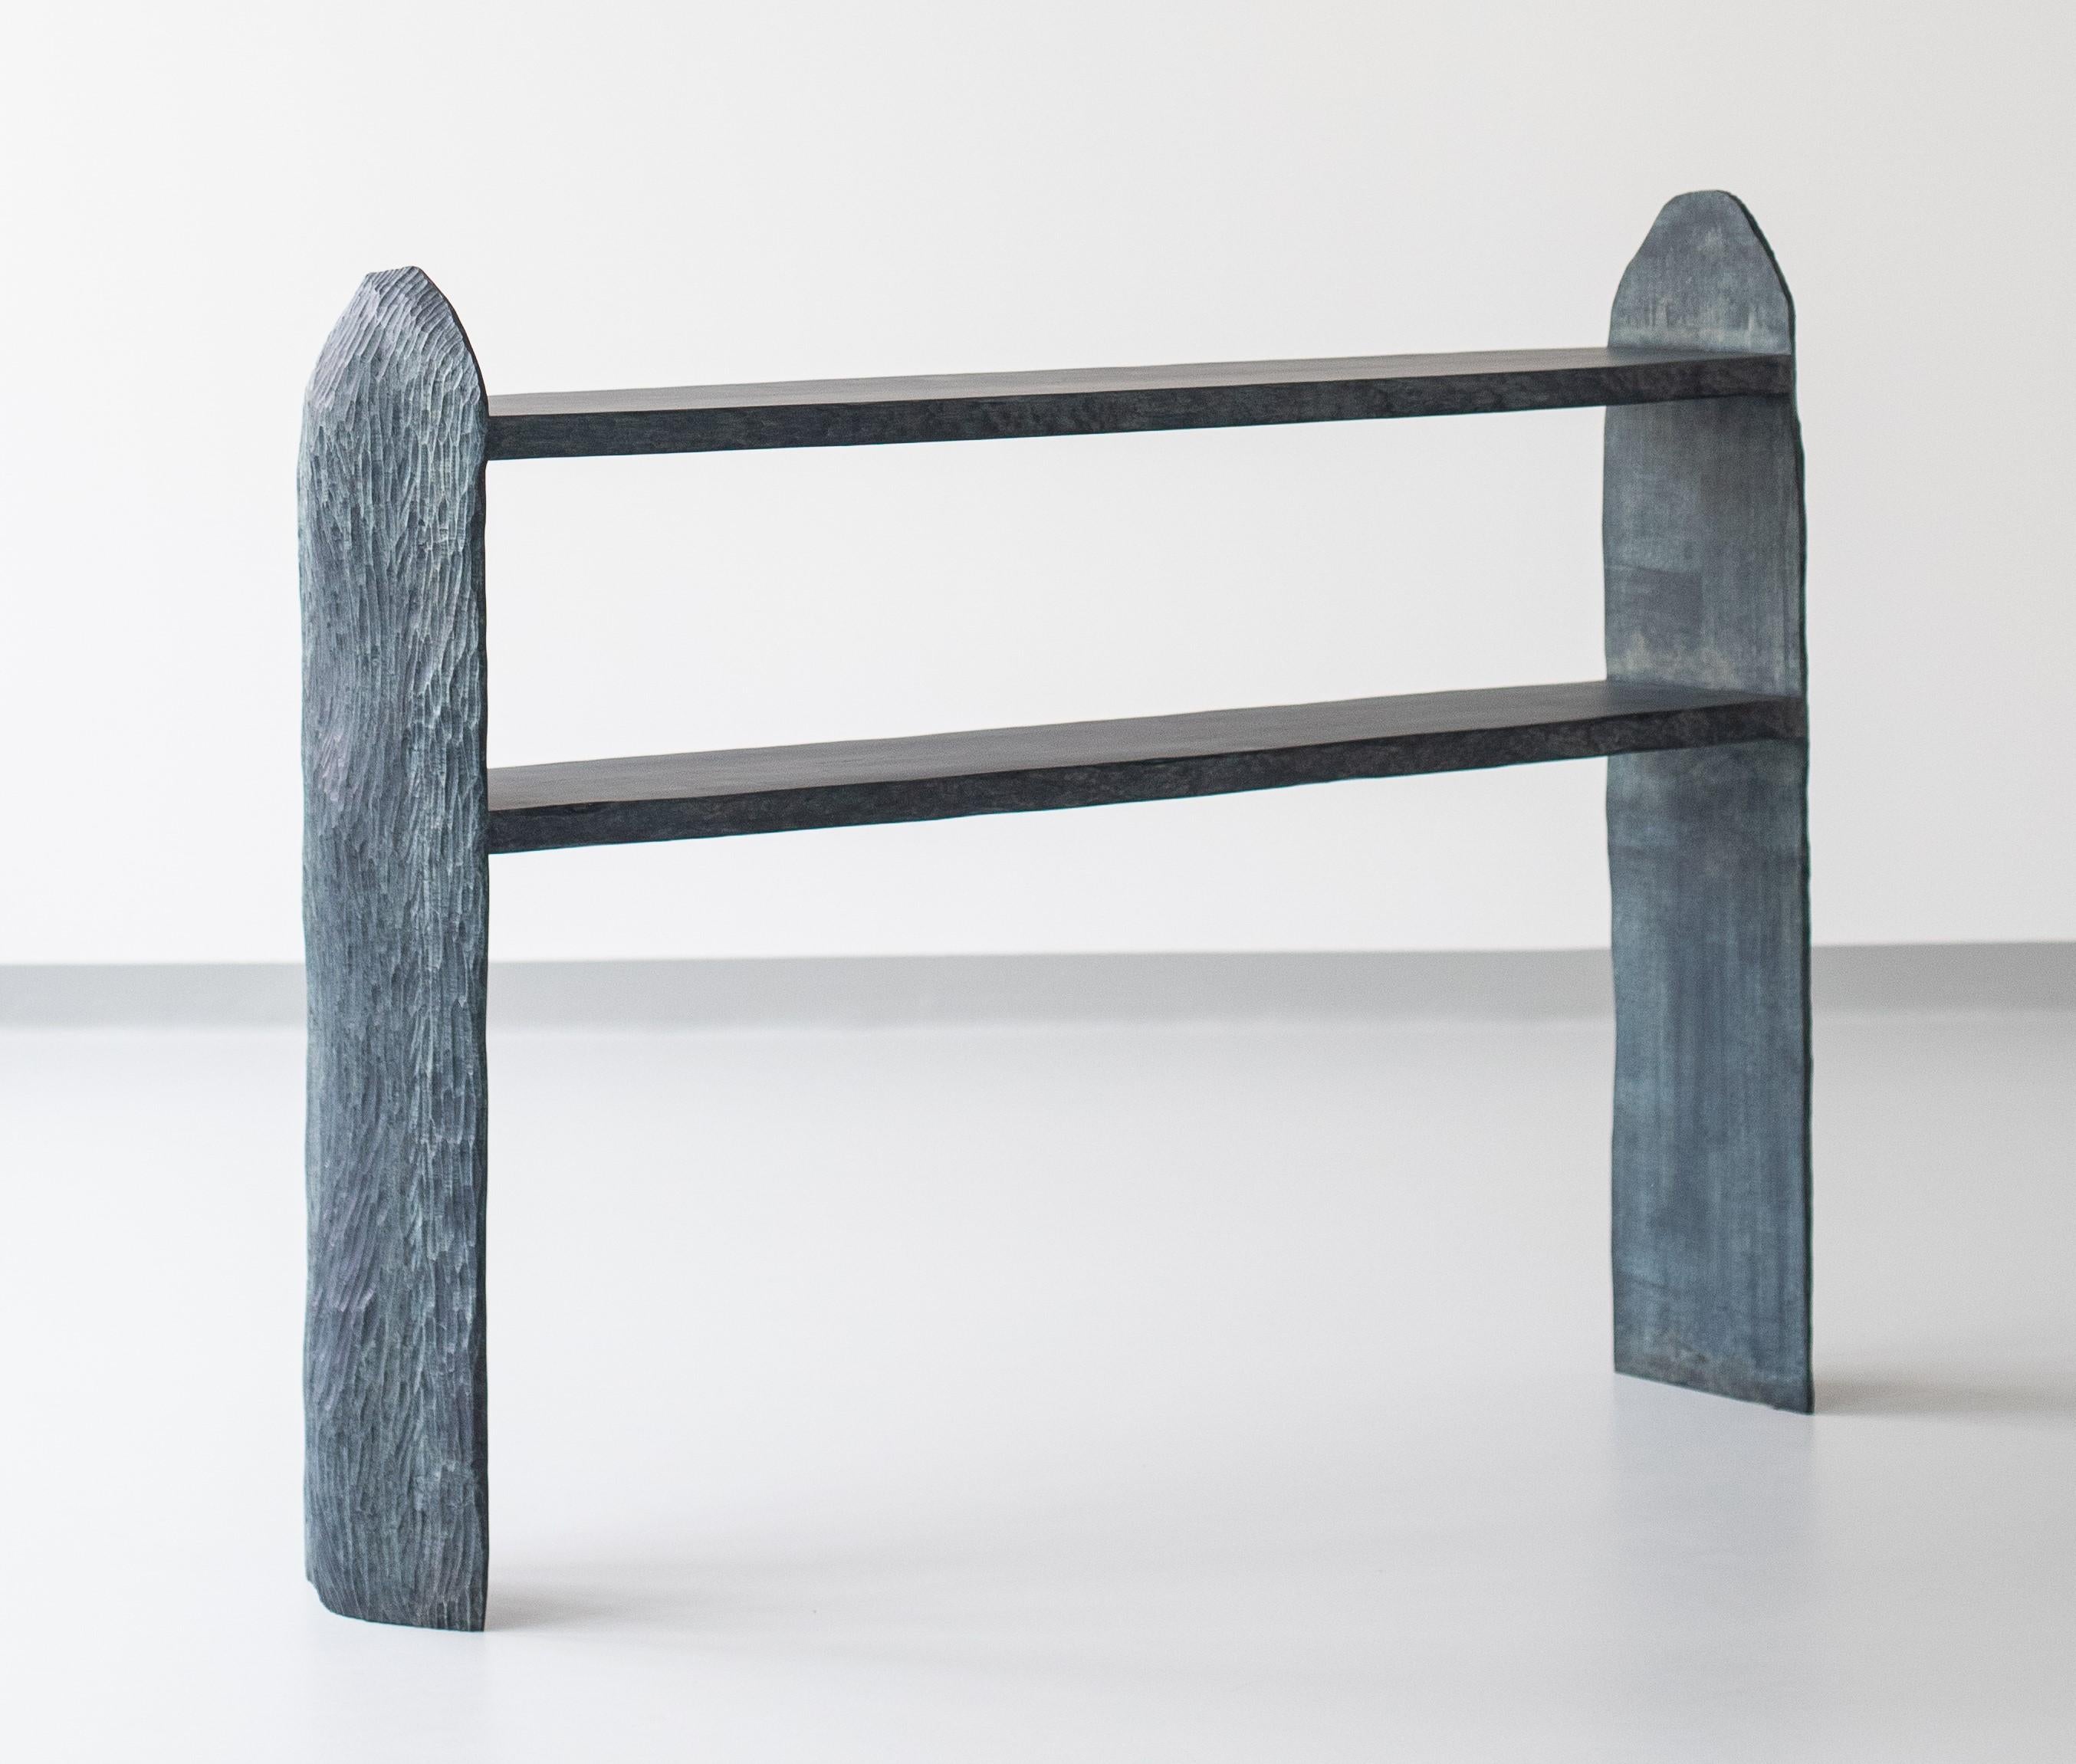 Intuitive Archaisme console by Cedric Breisacher
Dimension: D 160 x W 40 x H 110 cm
Materials: Sycamore.
Finish: Indigo dye, wax-oiled.

Designer-sculptor, Cedric Breisacher has an atypical path. Self-taught man, he followed during five years an